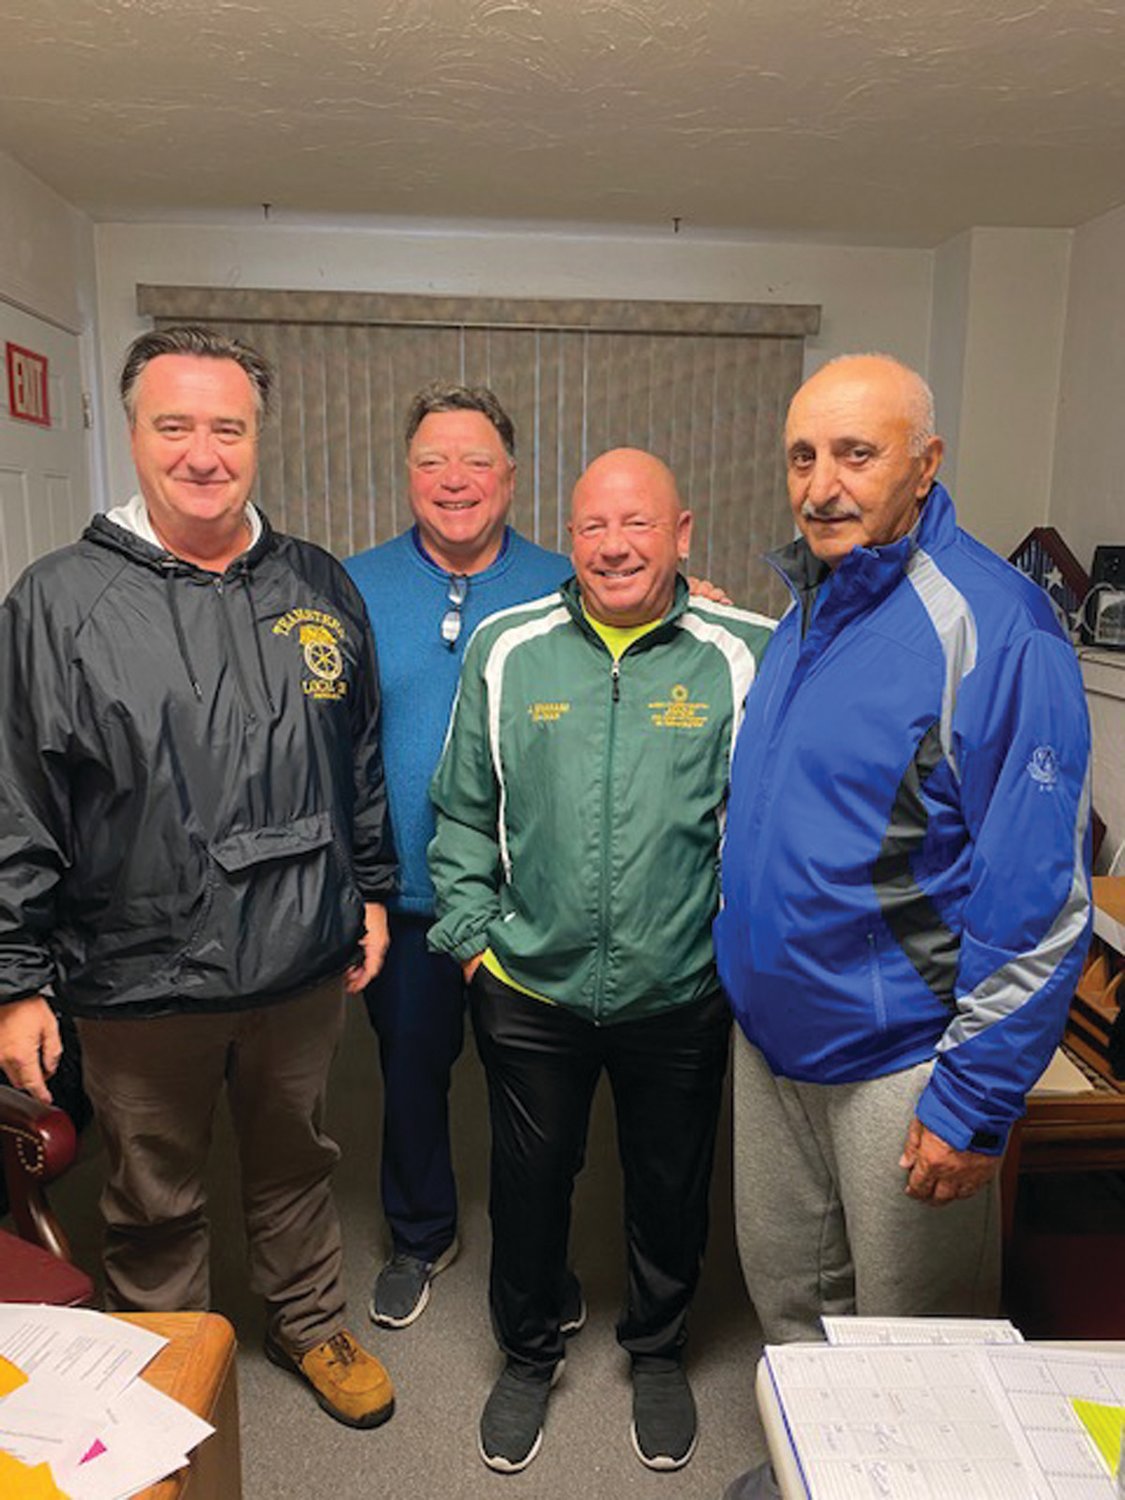 SALZILLO SUPPORTERS: Among the dedicated volunteers who will bring back the Ricky Salzillo Memorial Game Dinner on Sunday, Feb. 6, 2002 are, from left, Jim Hunter, Steven Placella, John Graham and Vin LaFazia. Tickets are $35 each and on sale now at various locations.